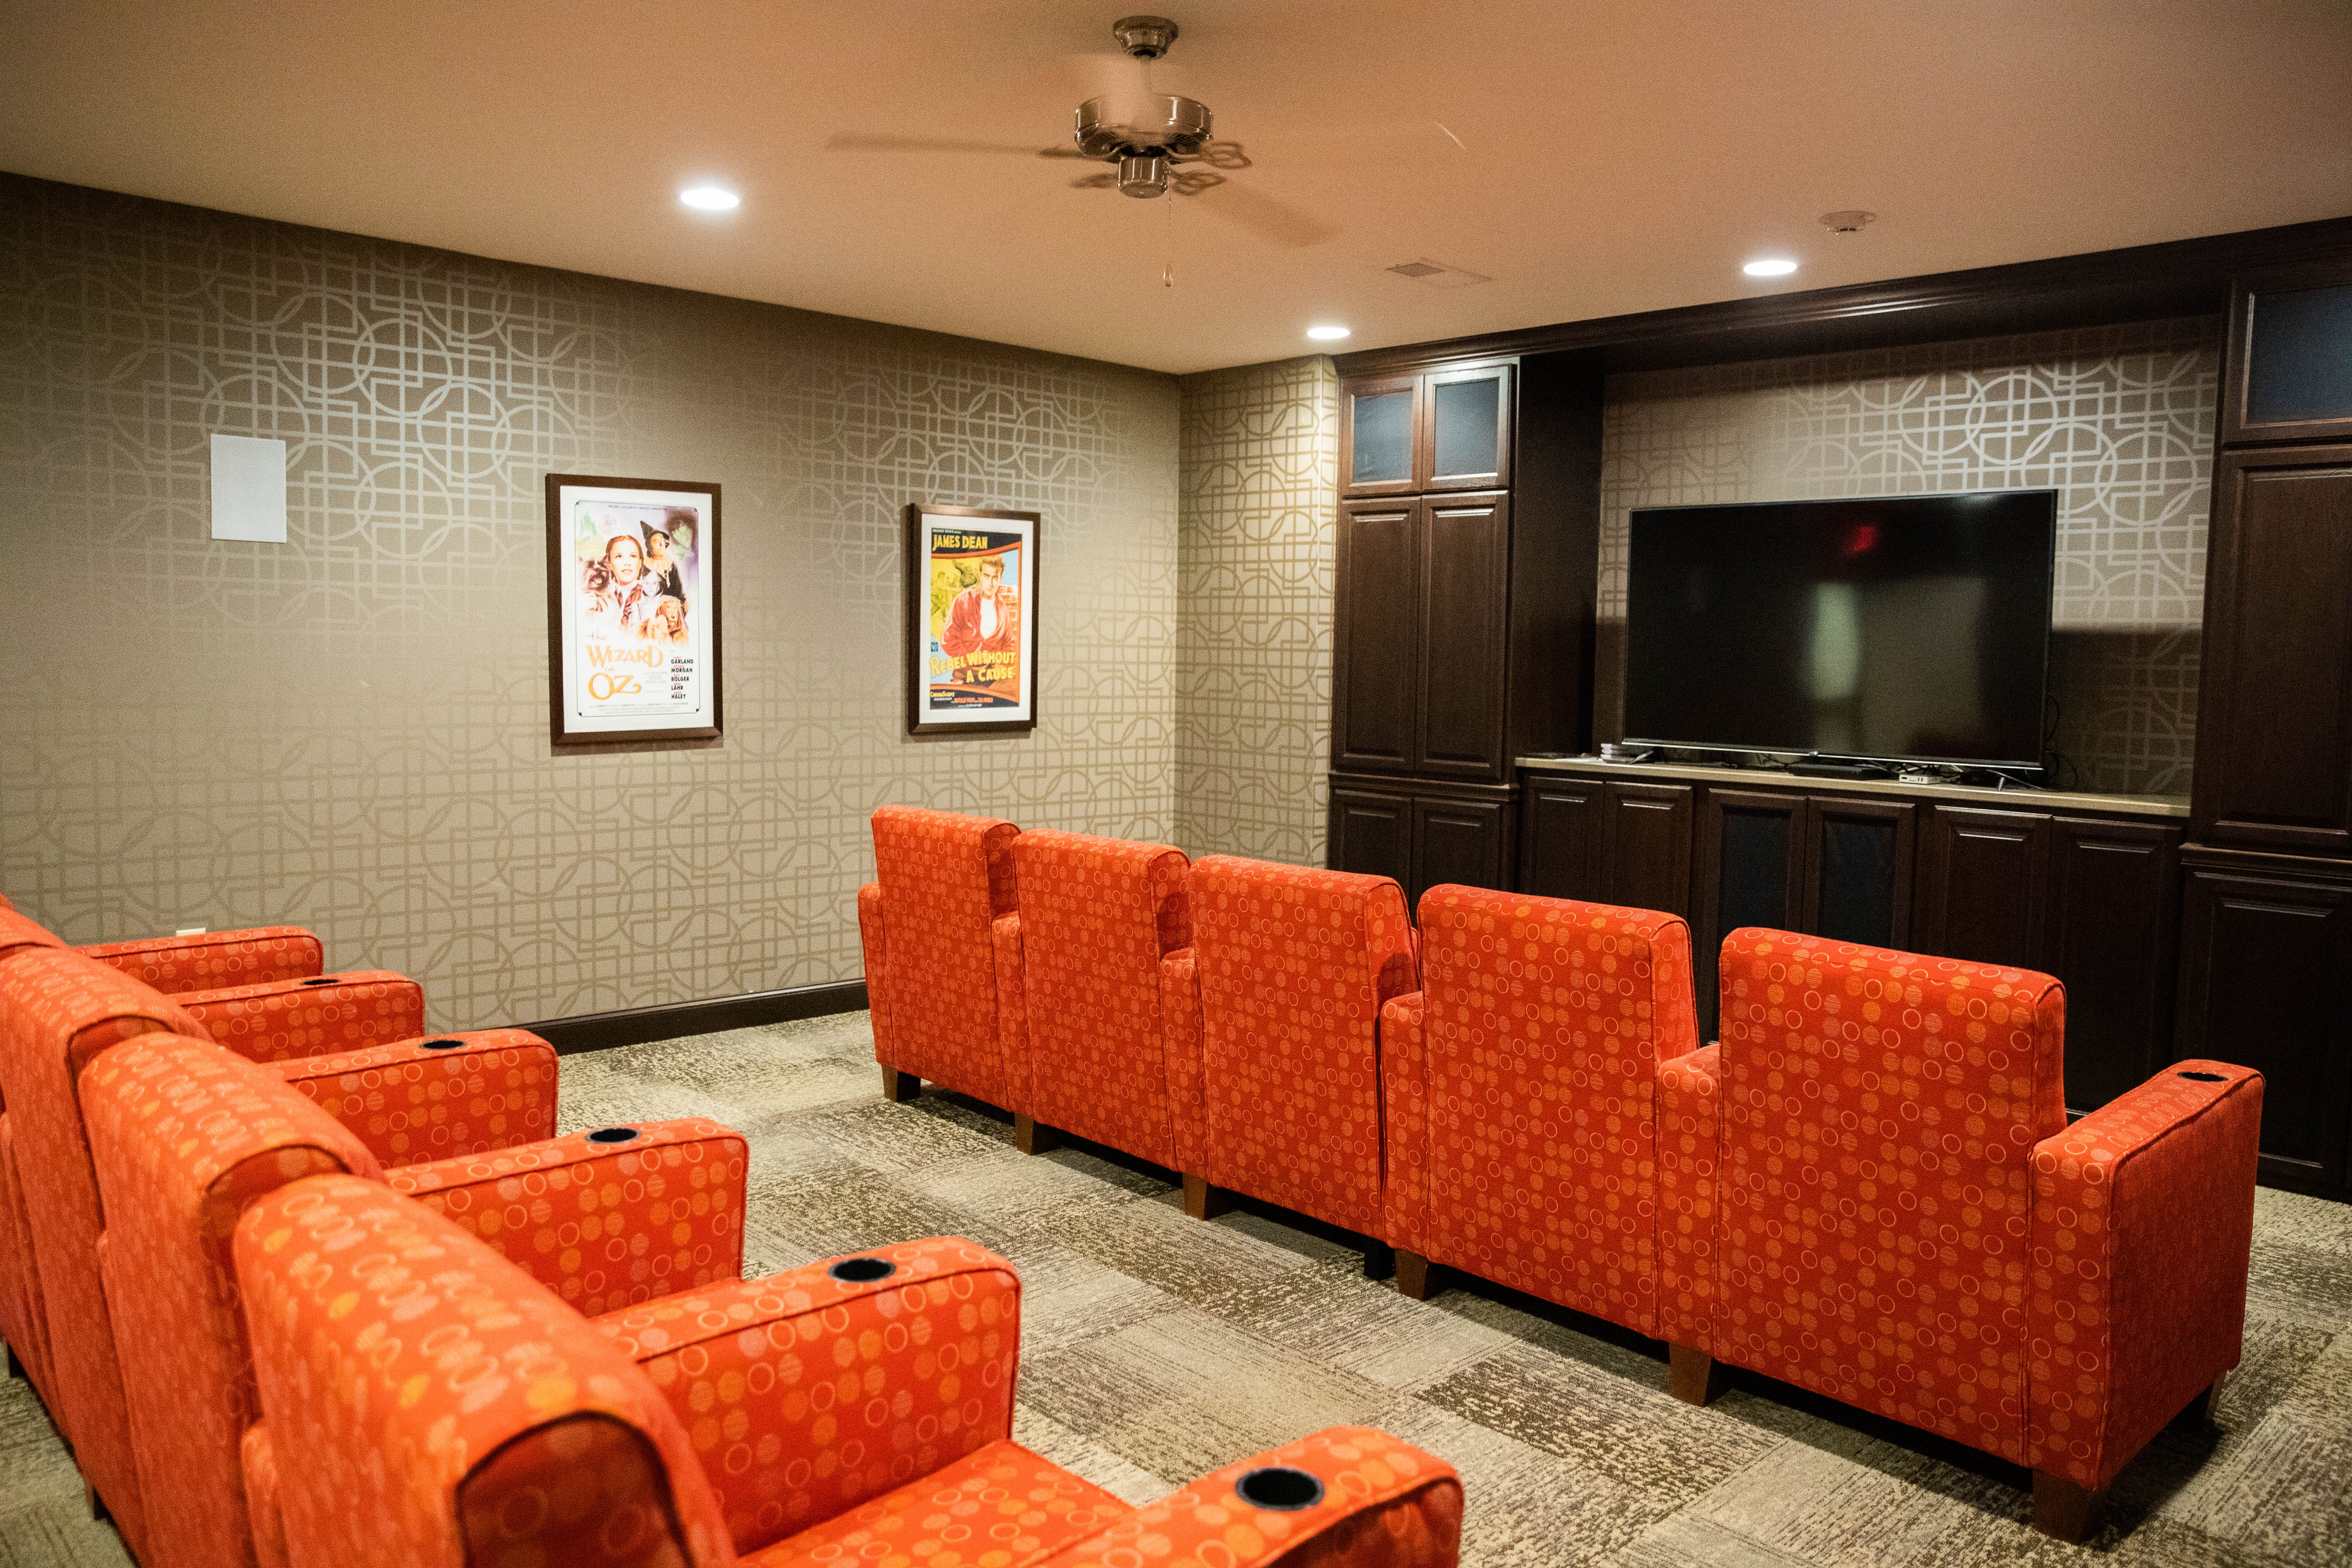 <span  class="uc_style_uc_tiles_grid_image_elementor_uc_items_attribute_title" style="color:#000000;">The resident theater interior at the Aster Place Assisted Living Apartments. </span>